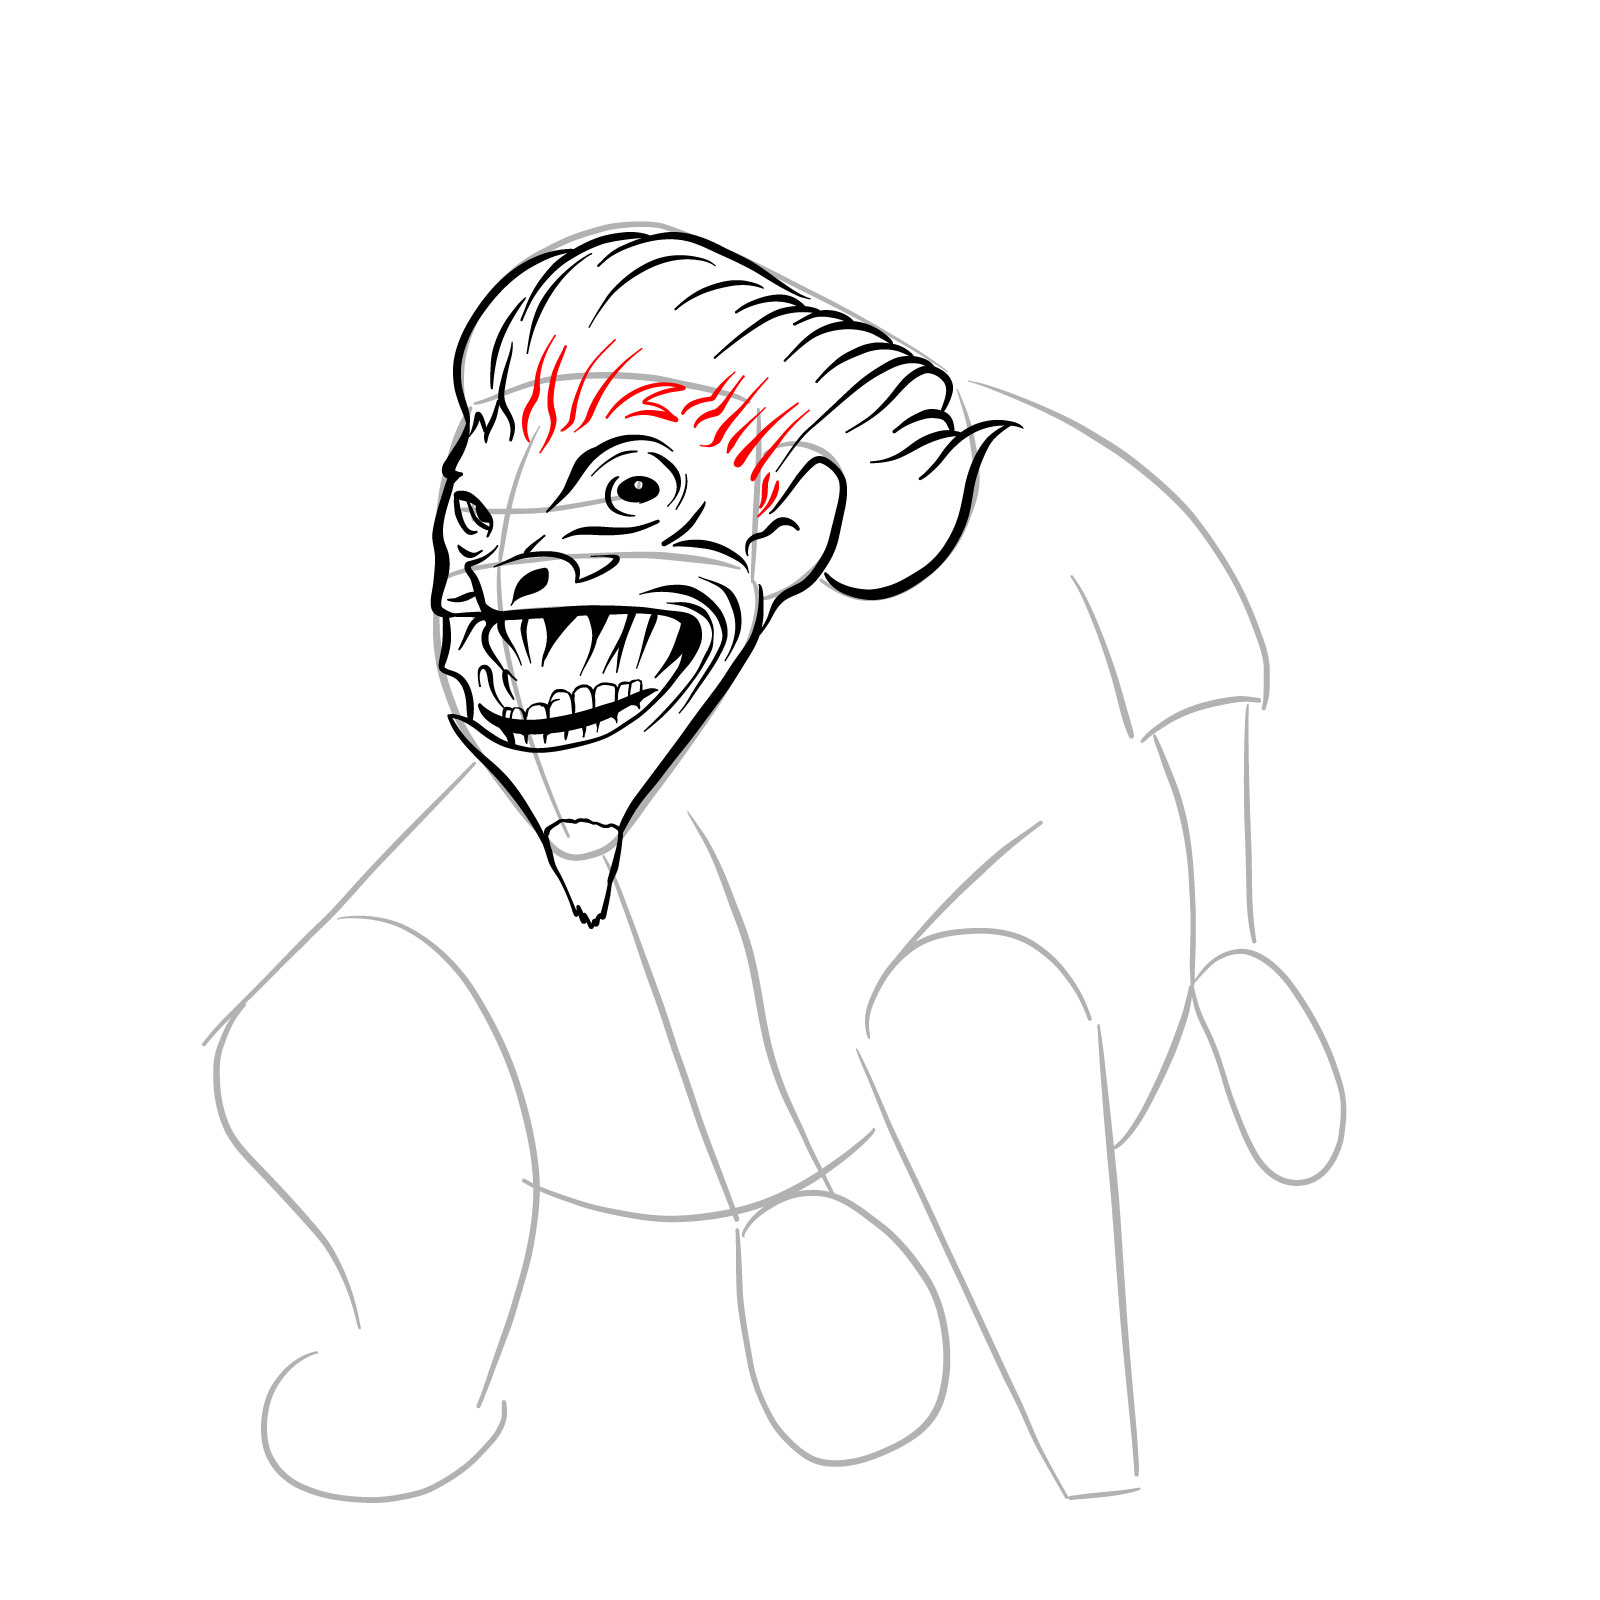 How to draw a Boggart - step 16